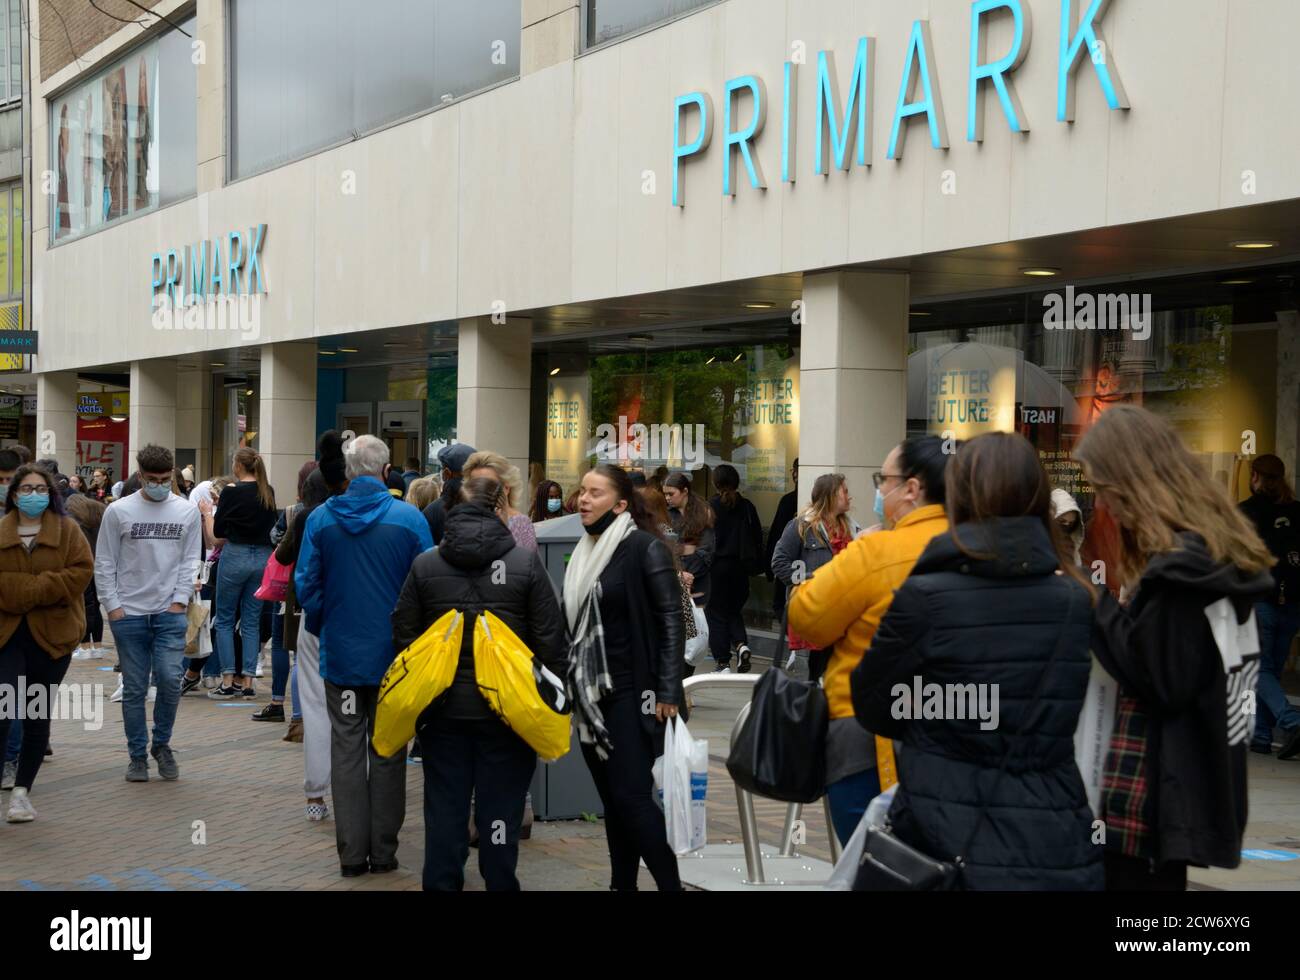 People queueing for Primark, in Nottingham Stock Photo